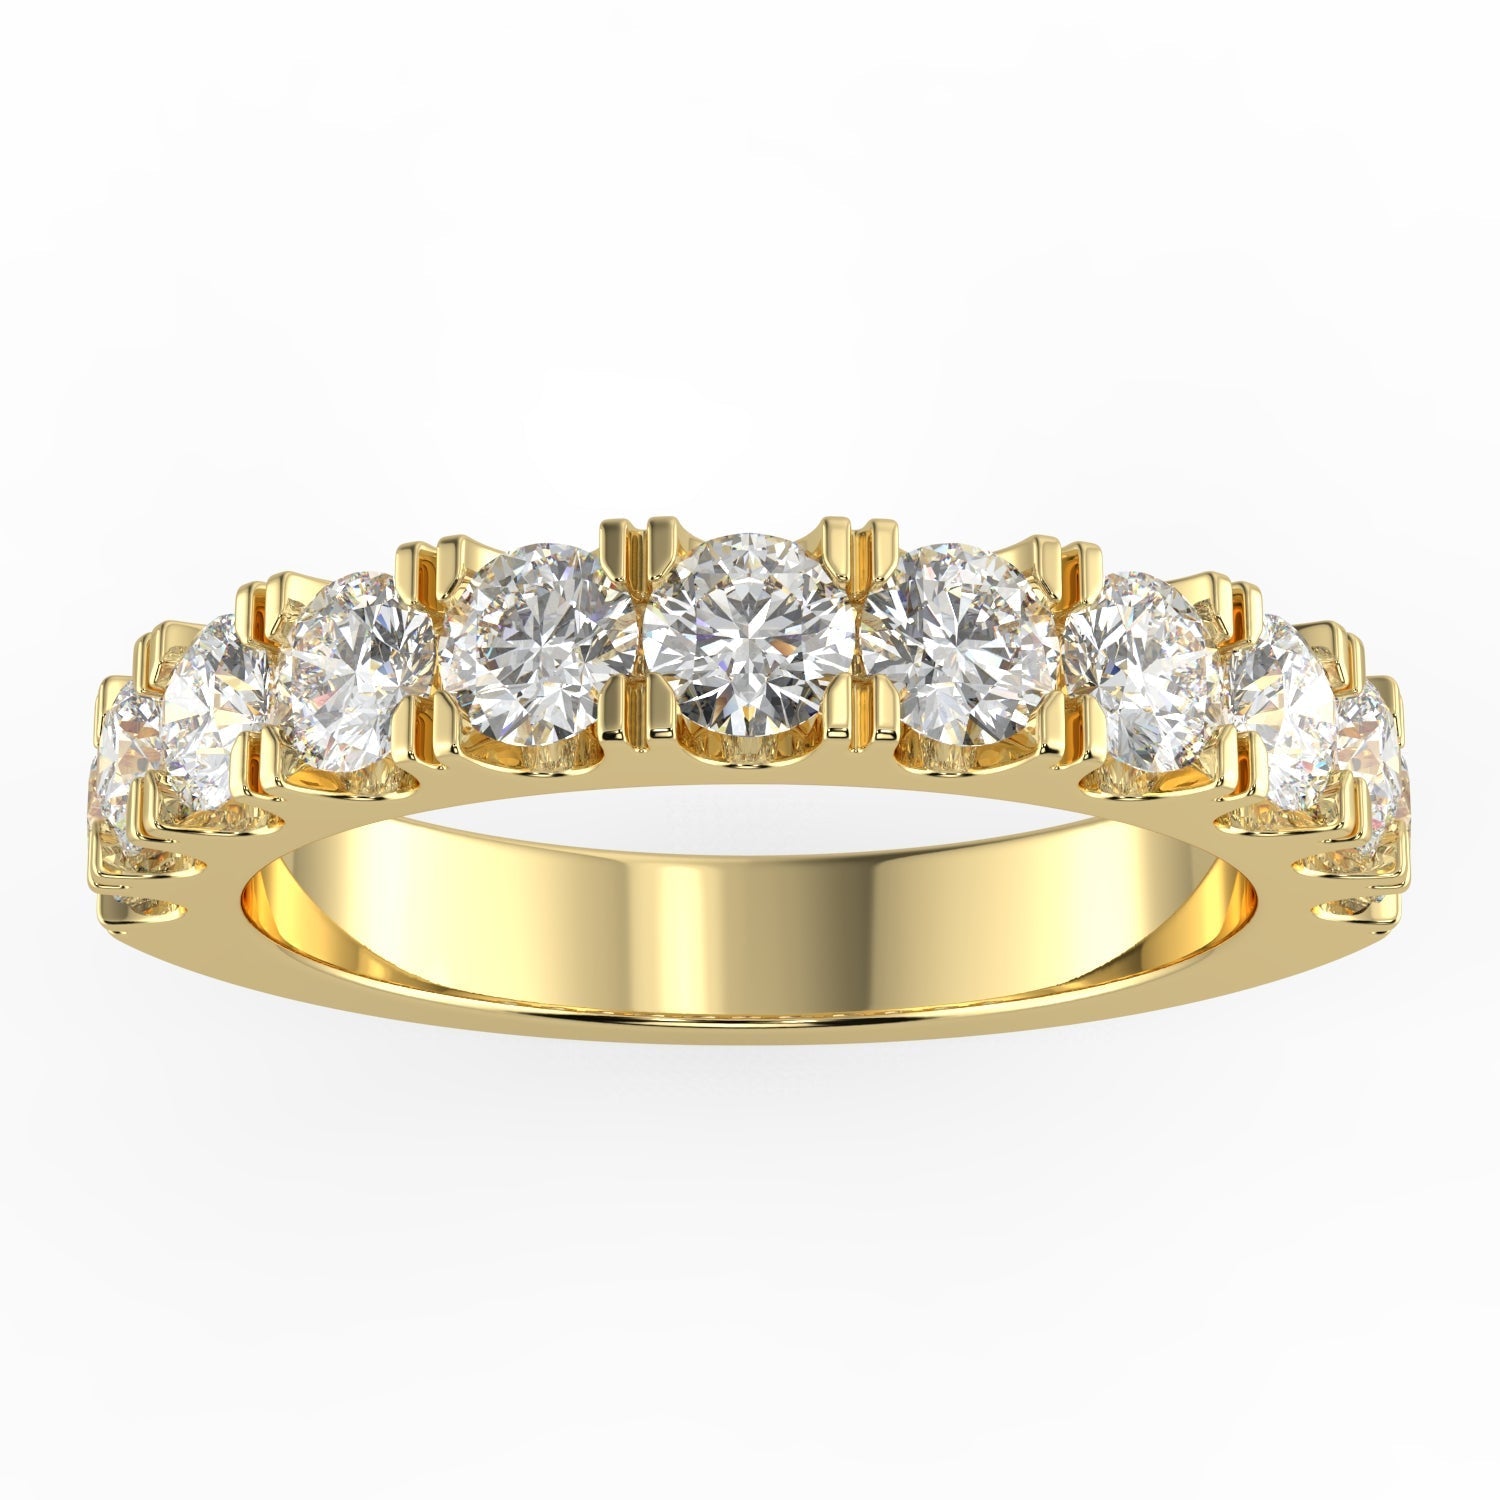 1CTW 11 ROUND STONE PRONG SET NATURAL DIAMOND GH/SI HALF ETERNITY WEDDING /ANNIVERSARY BAND SET IN 14K GOLD